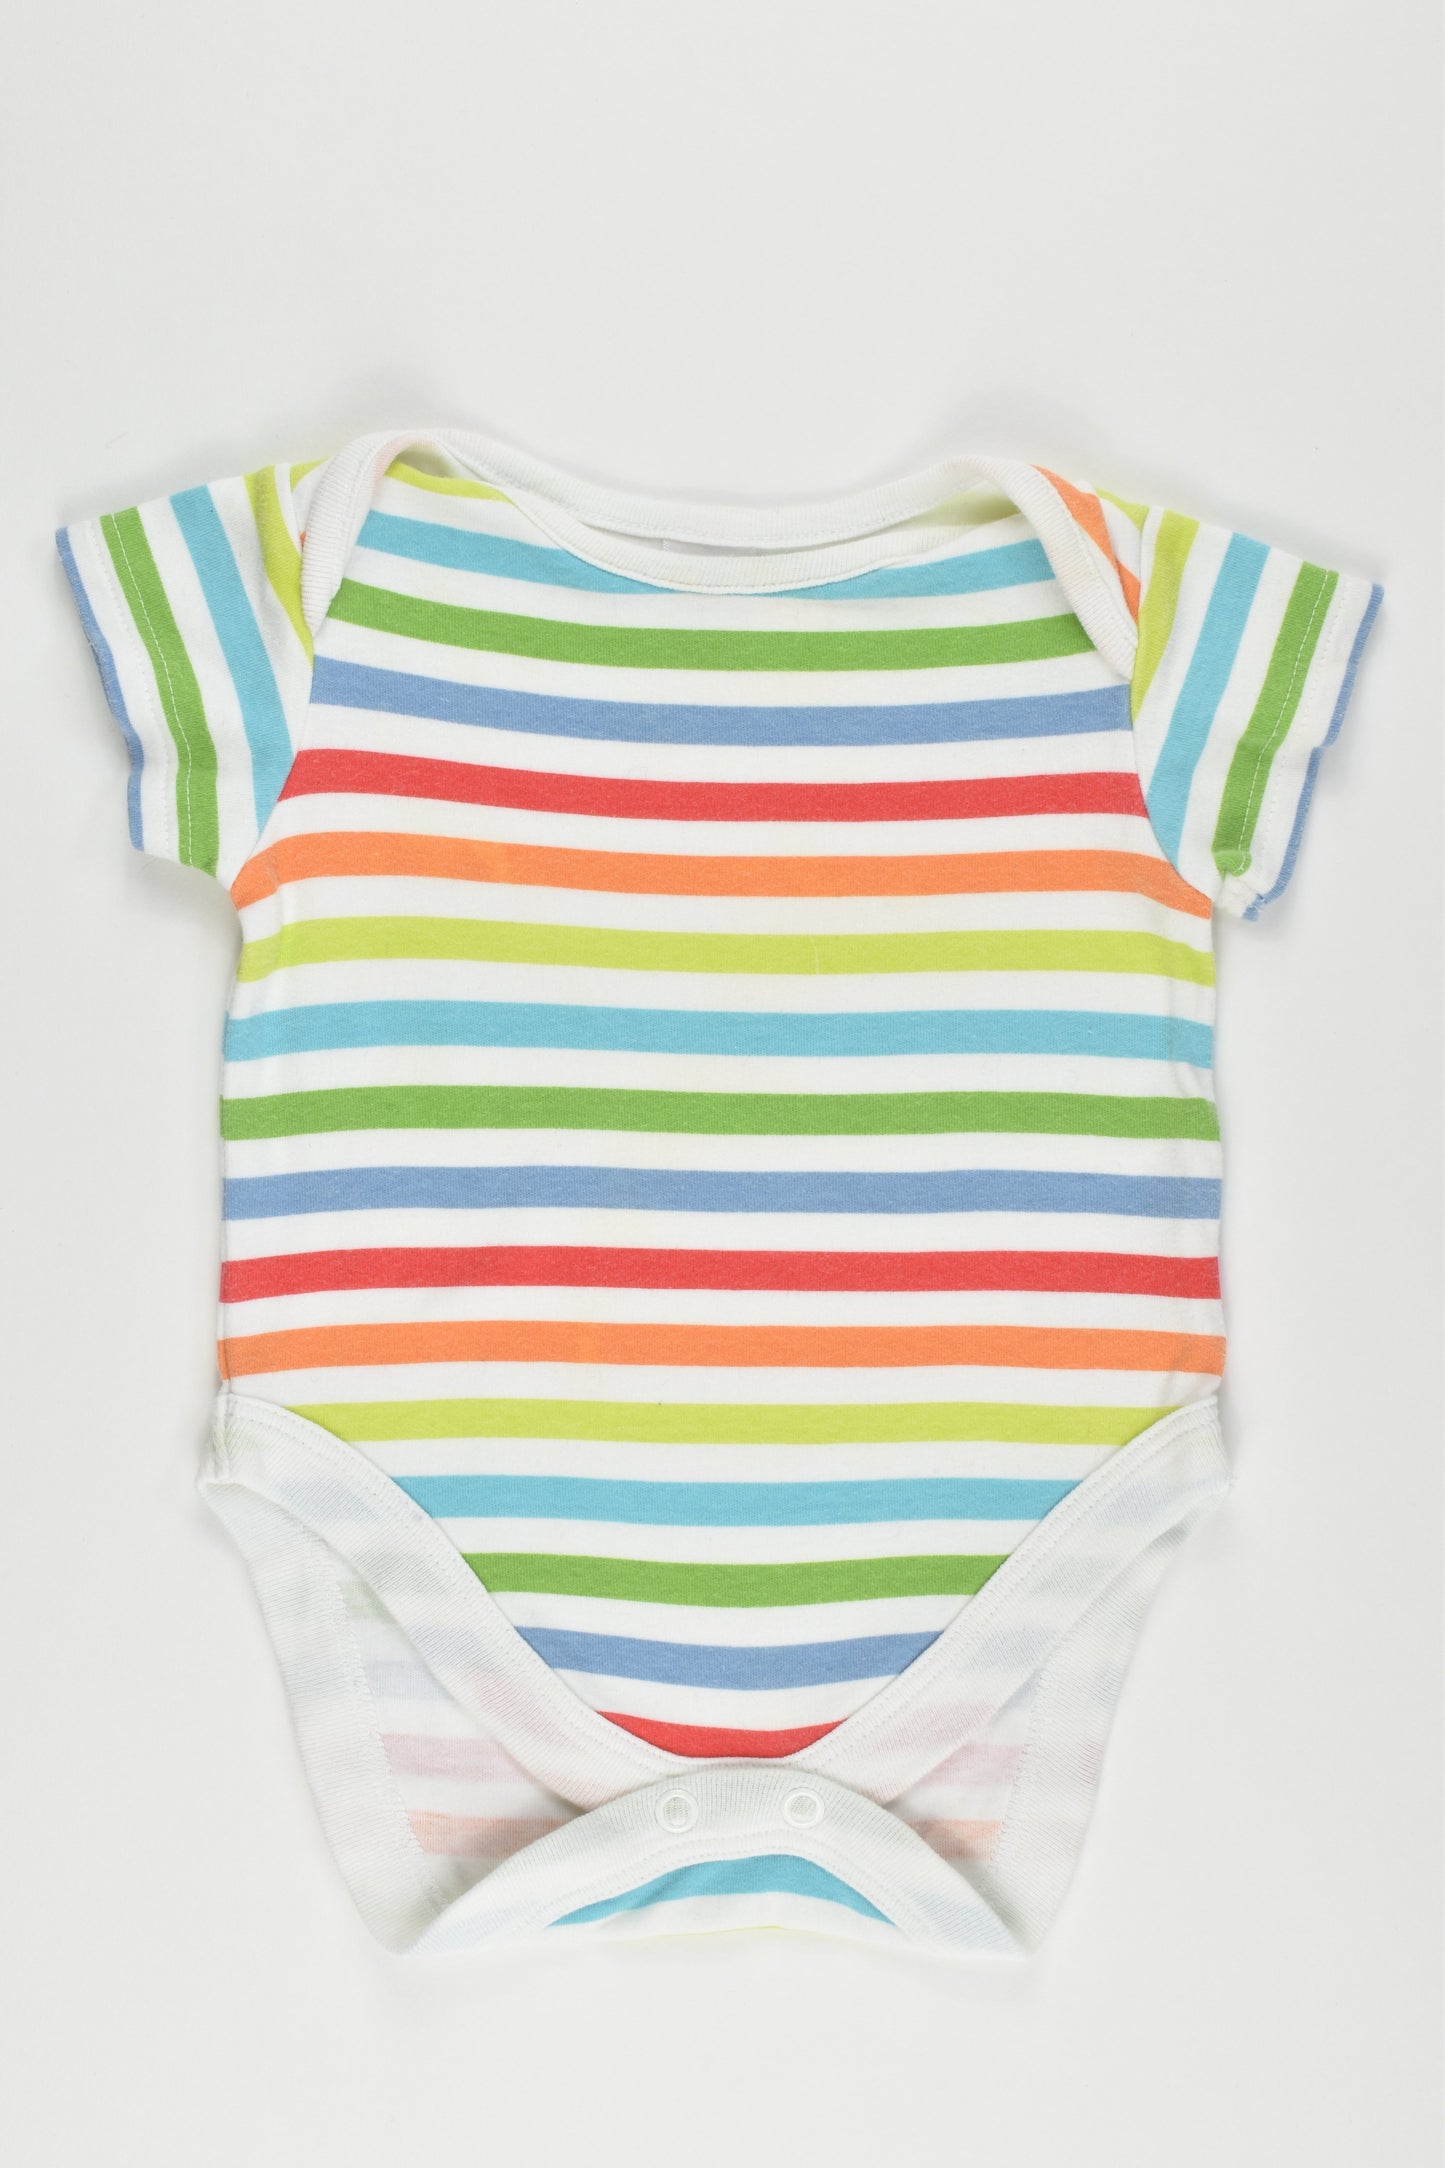 Next Baby Size 0000-000 (Up to 3 months) Bodysuit